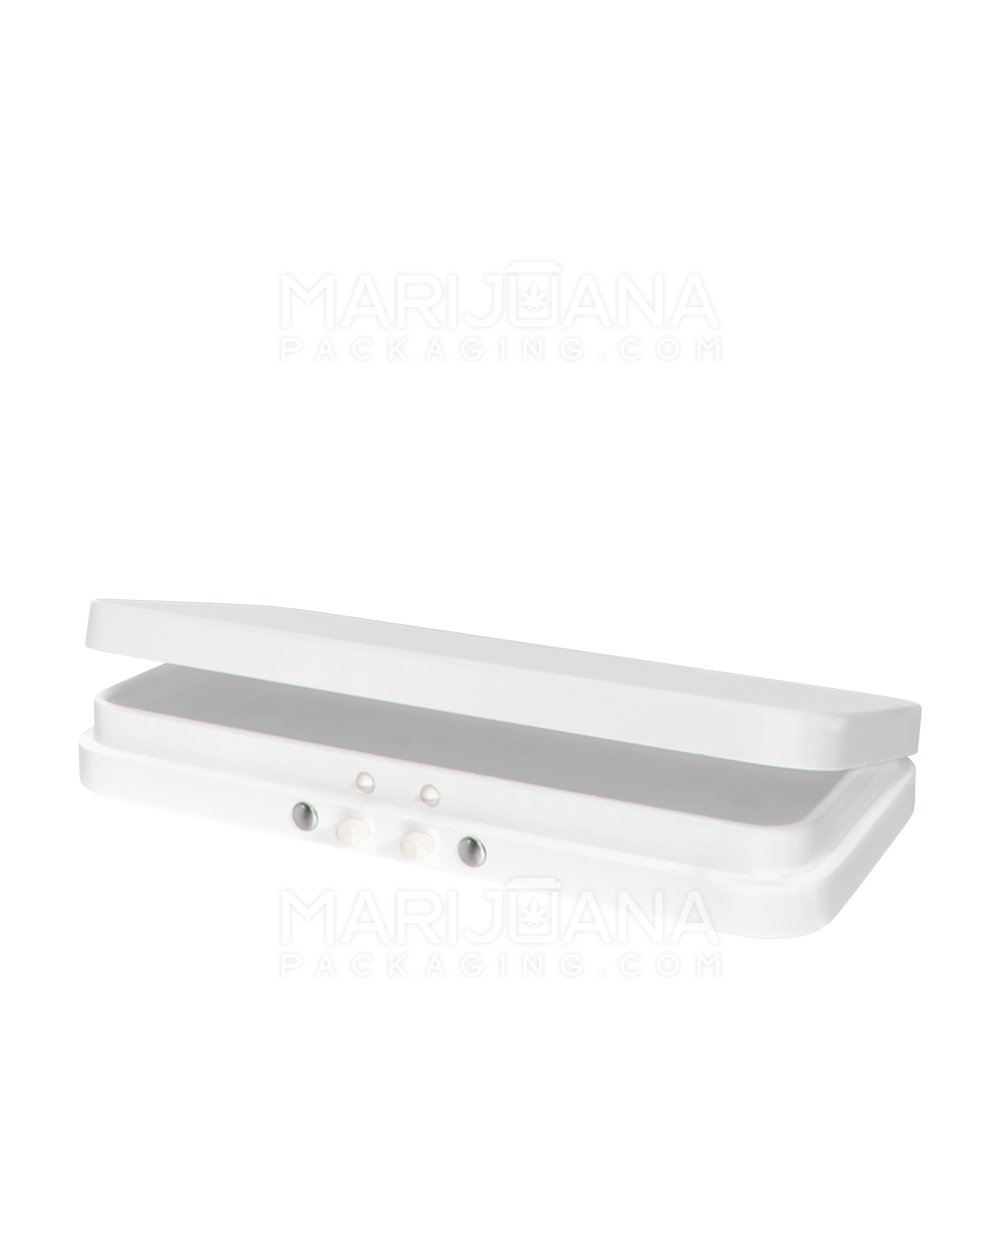 Custom 100% Recyclable Child Resistant Hinged-Lid Large Joint Box | 120mm x 61.7mm - White Tin - 3